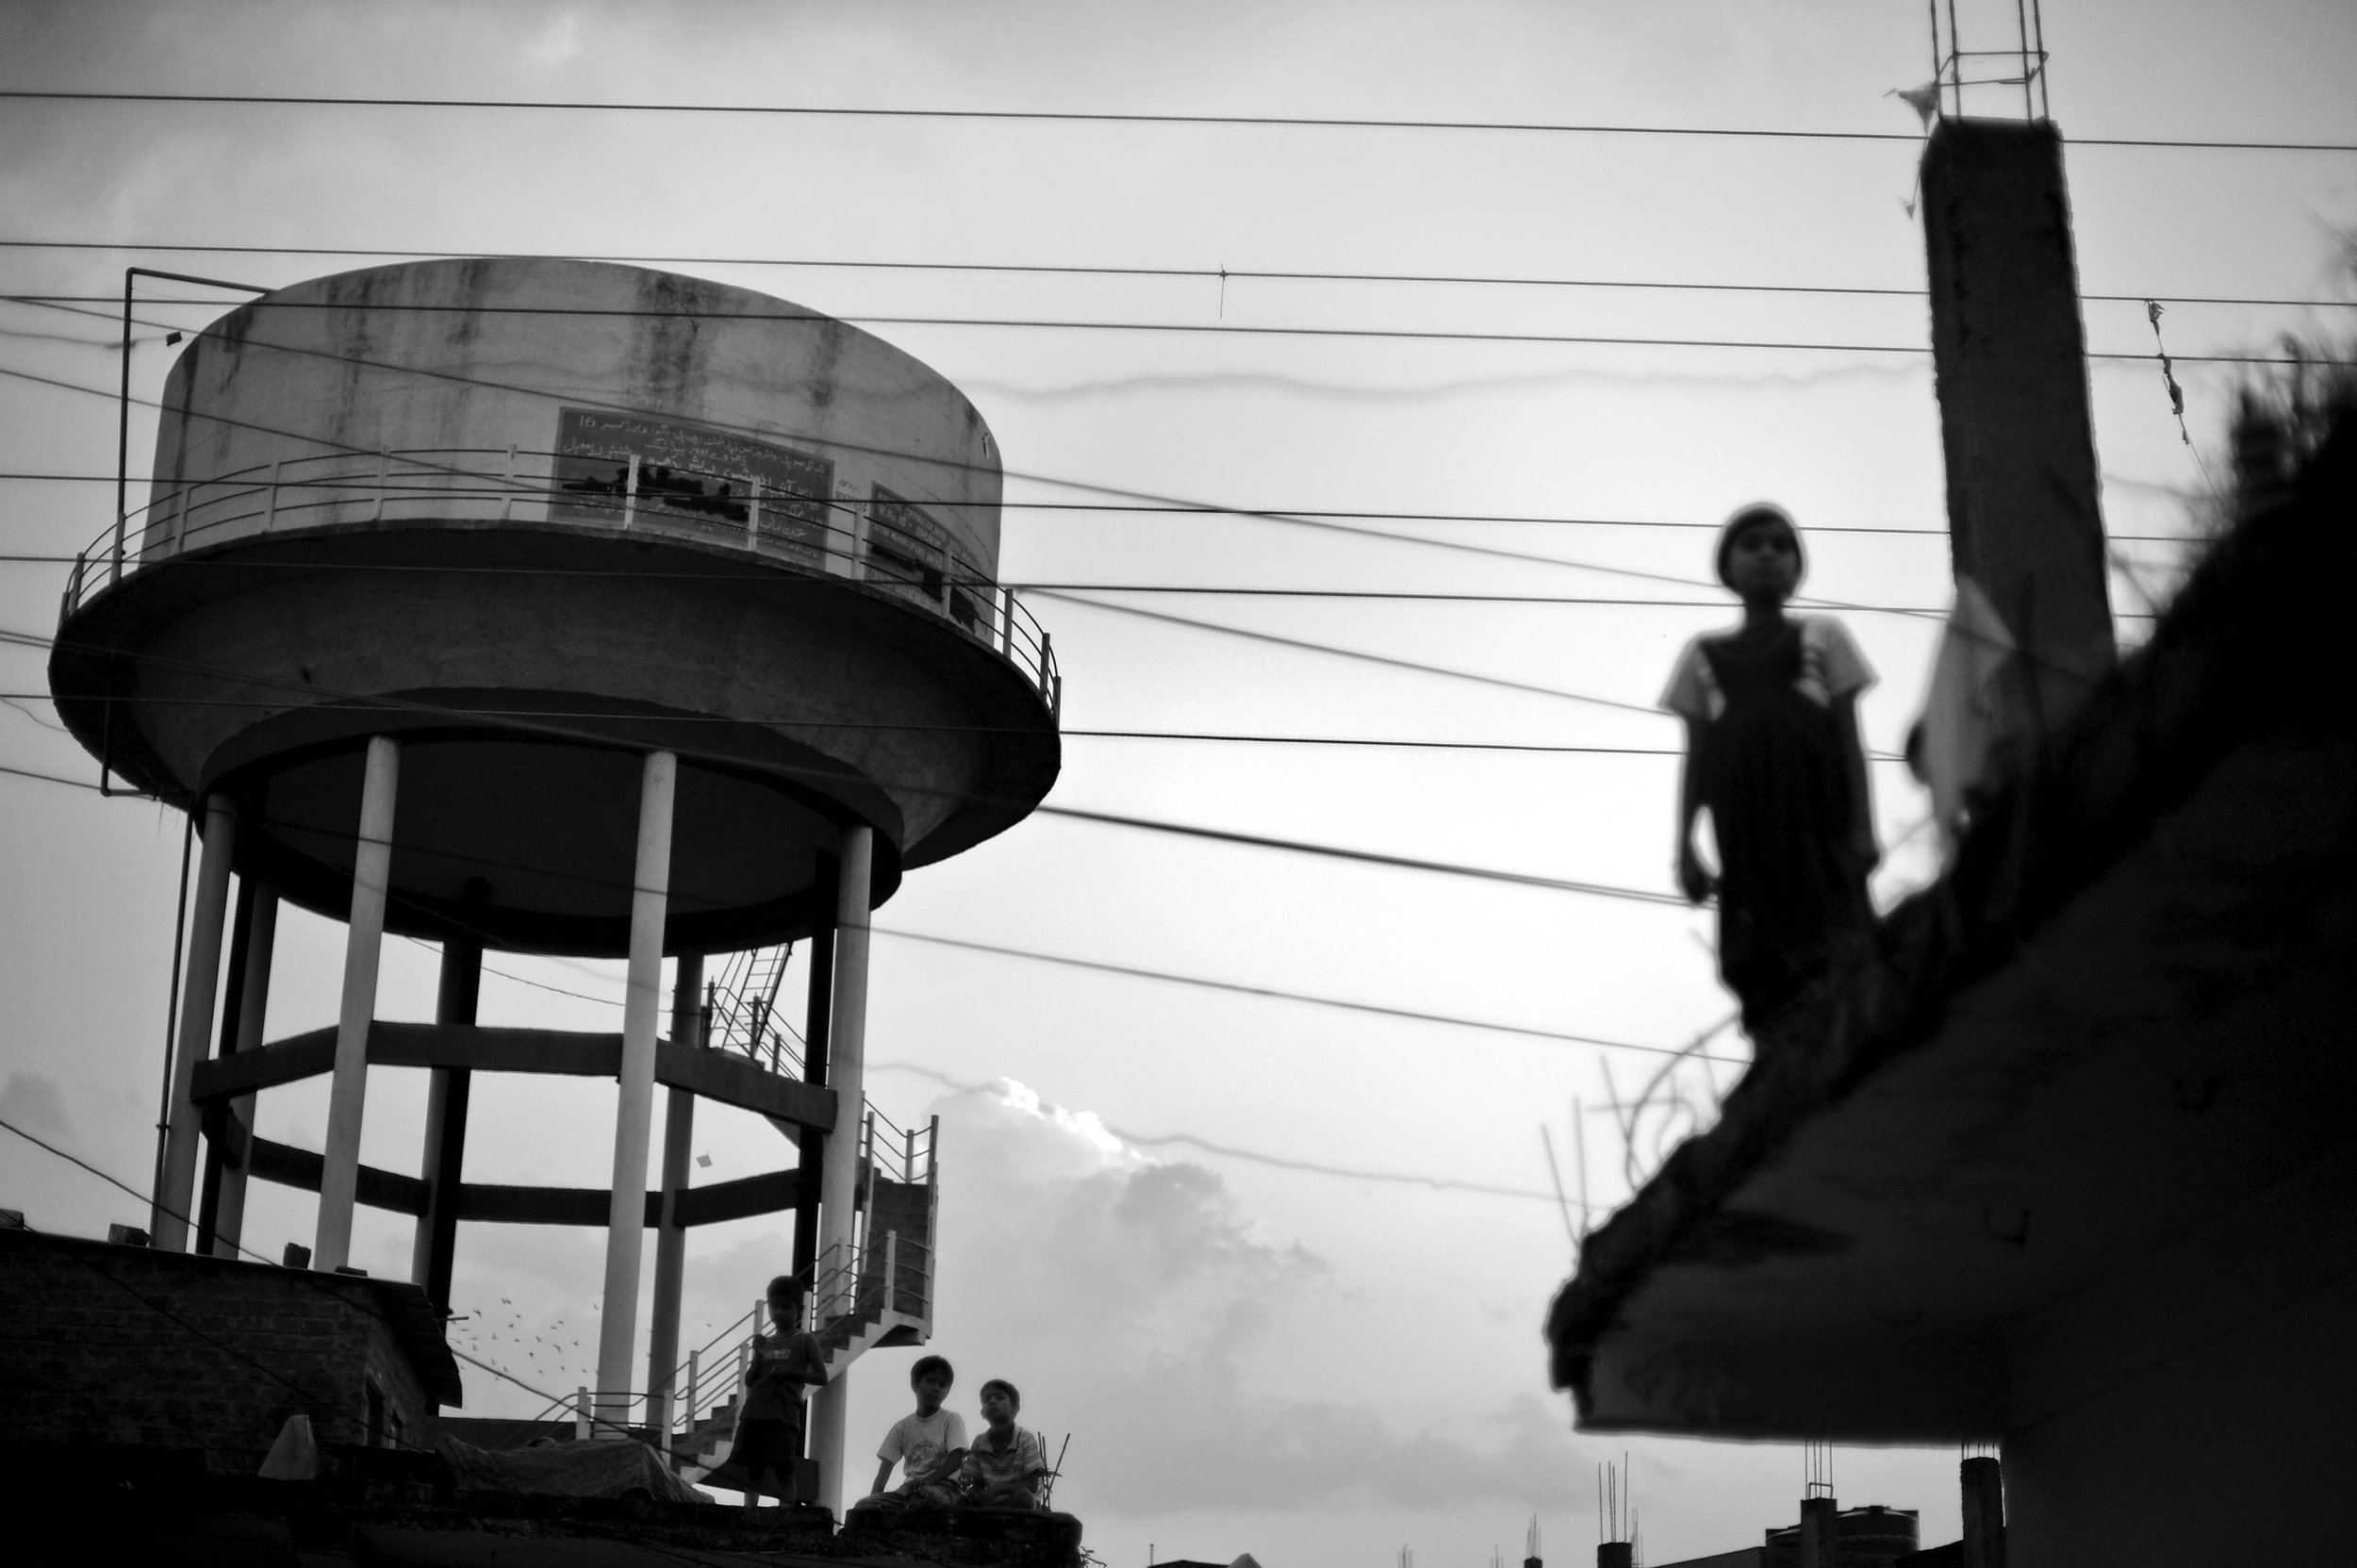  Children play on roofs near a water tower in the city of Bhopal in the state Madhya Pradesh, India.  Twenty-five years after a gas leak in the Union Carbide factory in Bhopal killed at least eight thousand people, toxic material from the ‘biggest in